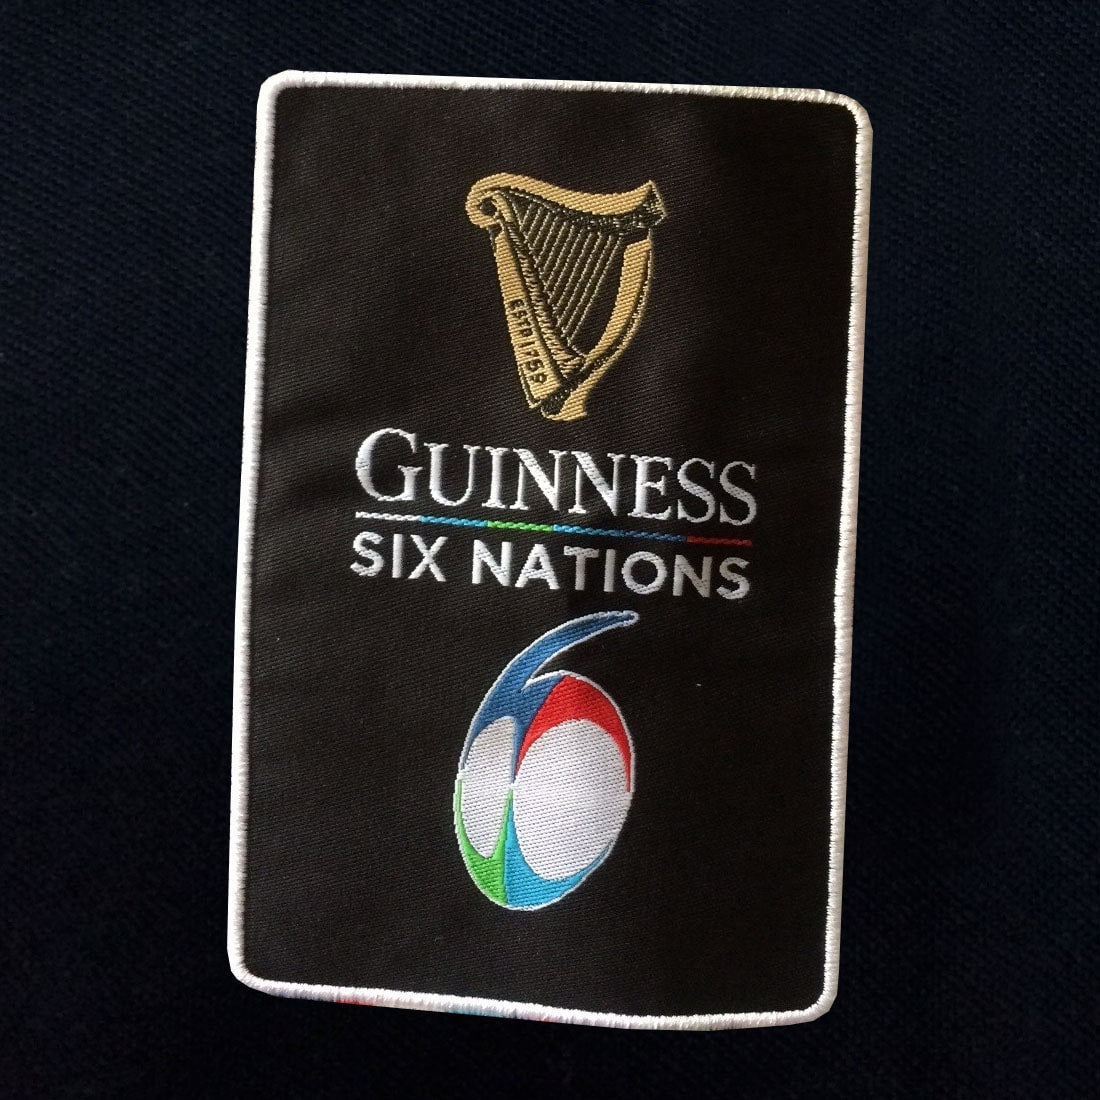 The Guinness Six Nations Black Polo is displayed on a black background.